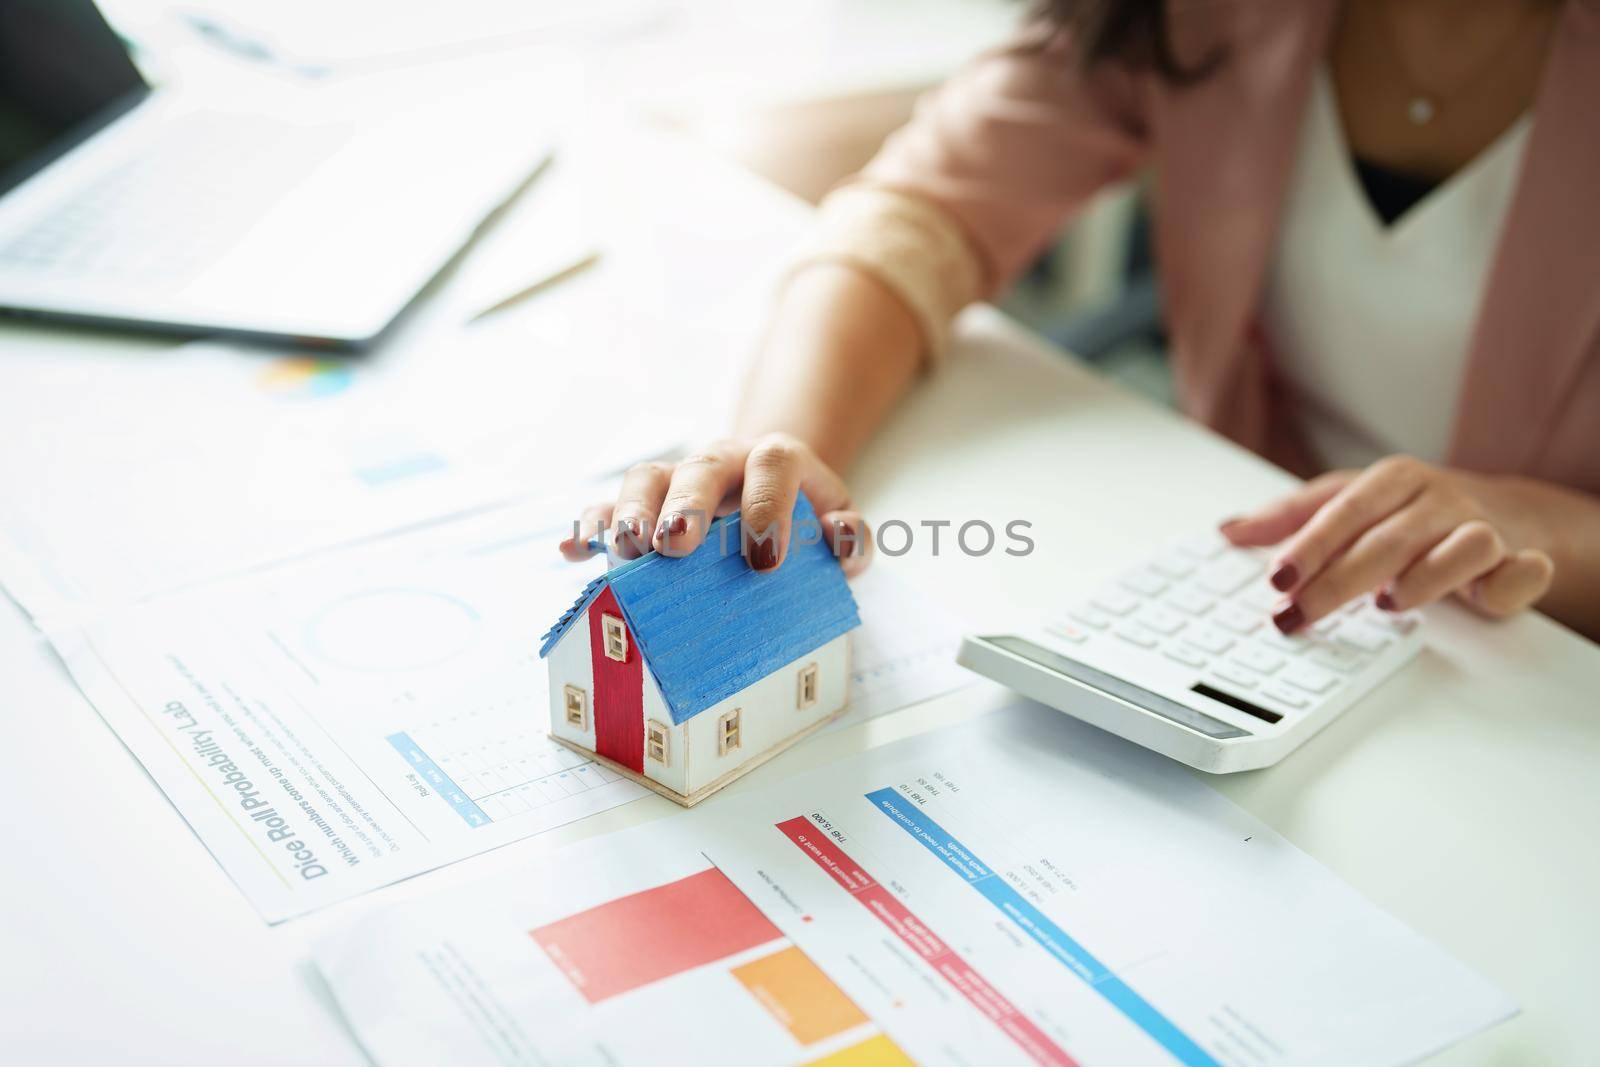 agents, land purchases and sales, property taxes,focus model house with real estate owners are using calculators to calculate home and land tax expenditures to manage financial and investment risks